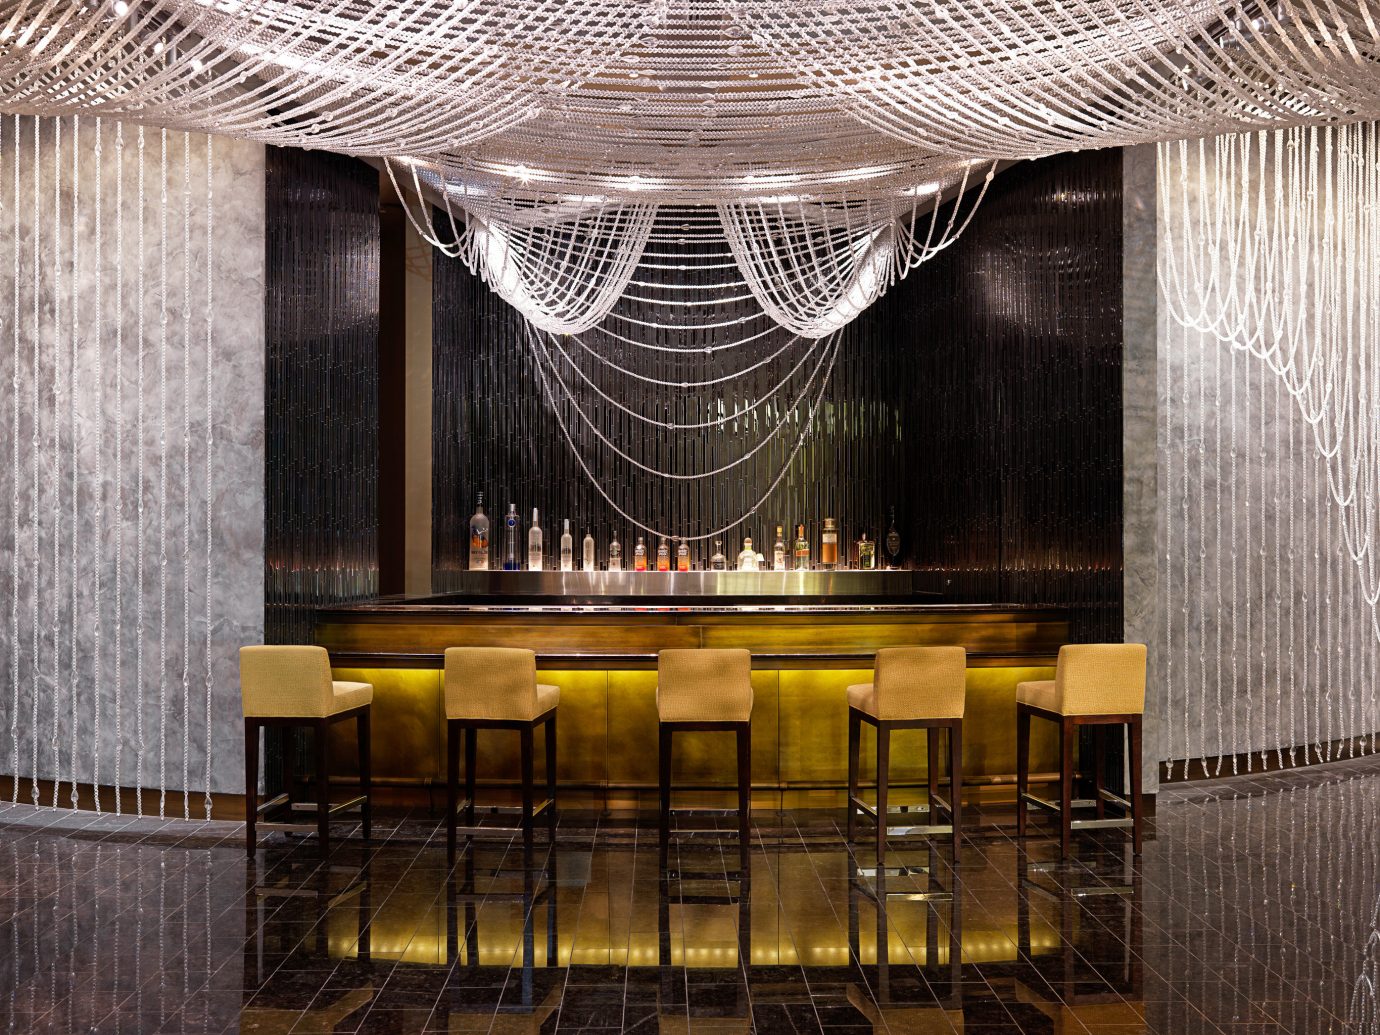 Bar City Design Drink Hotels Resort Trip Ideas Architecture interior design lighting ceiling stage wood window covering Lobby